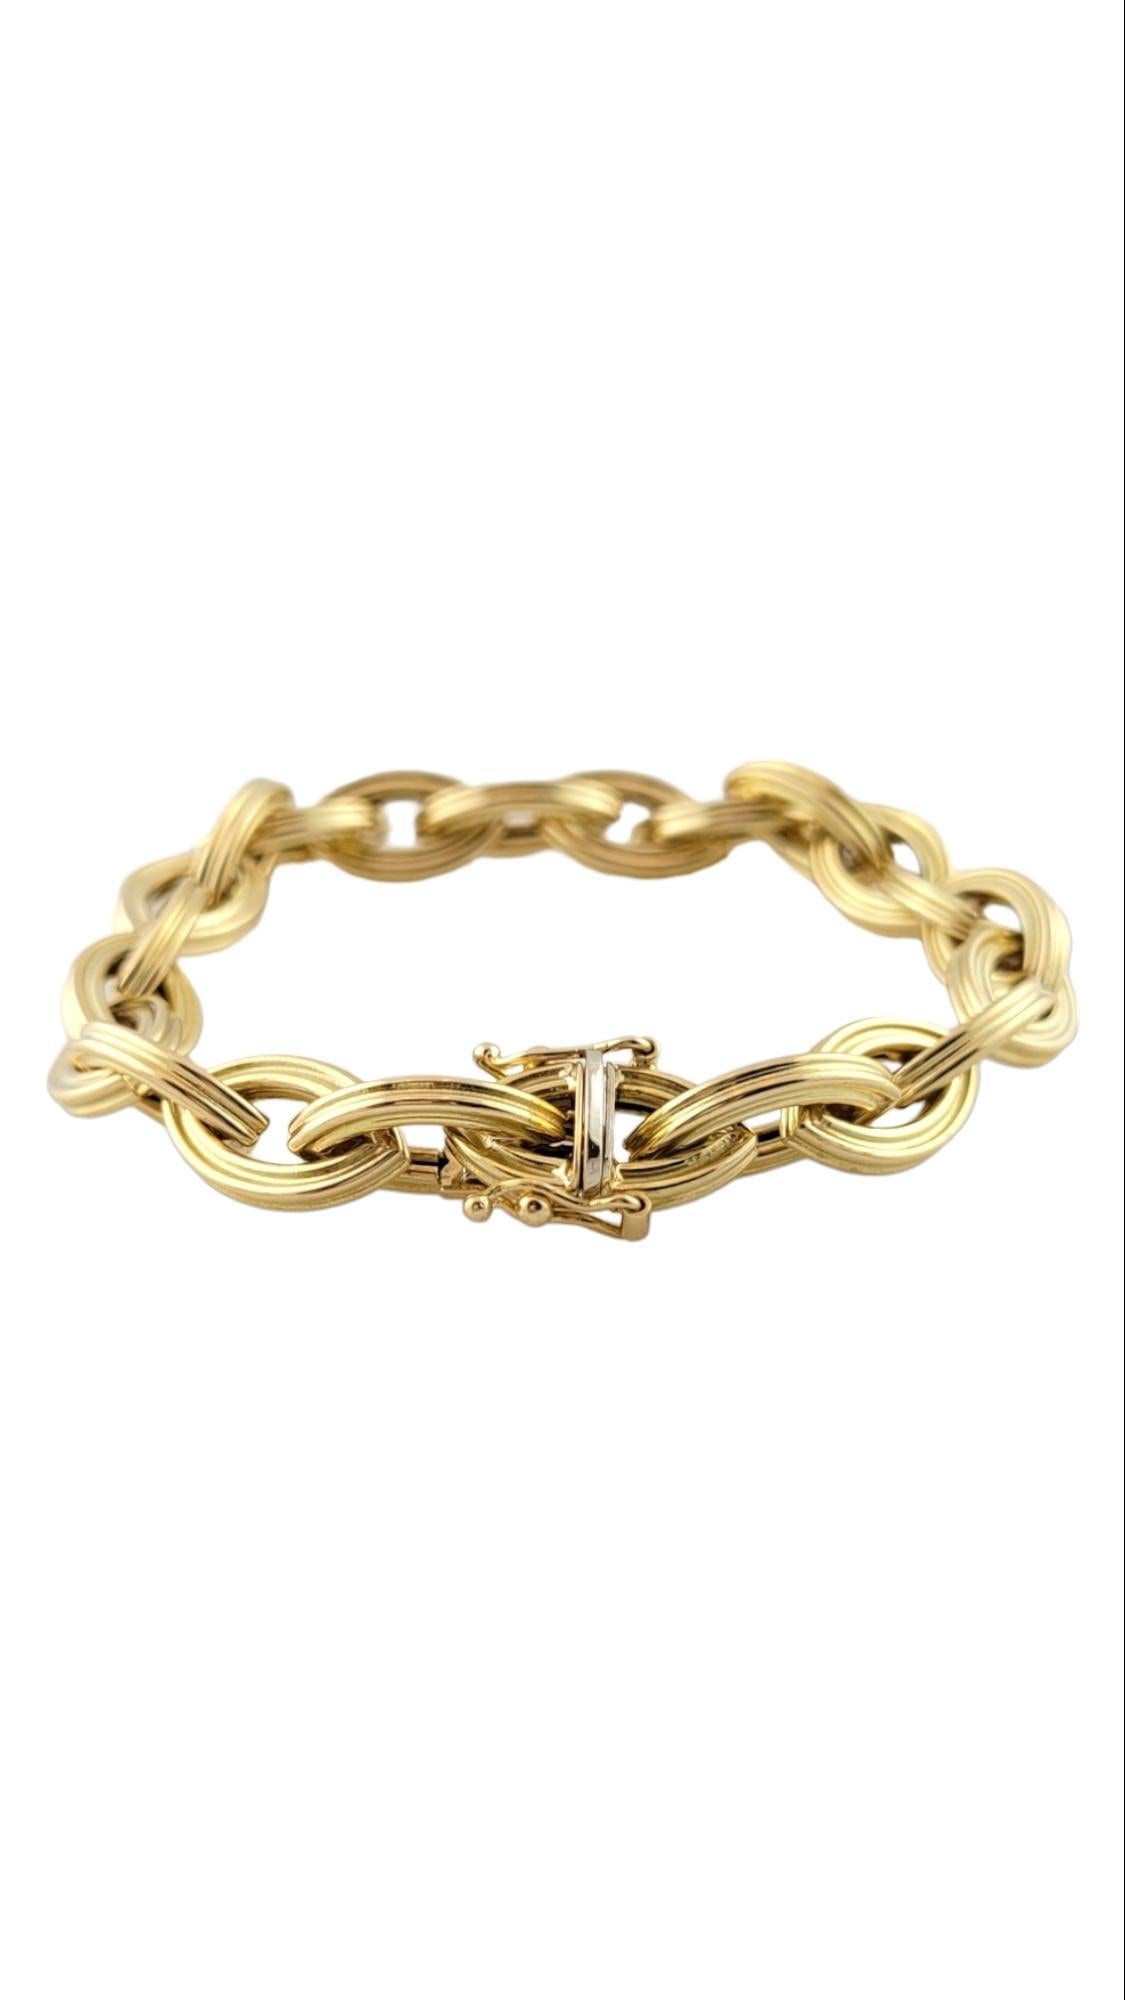 18K Textured Yellow Gold Link Bracelet #15866 In Good Condition For Sale In Washington Depot, CT